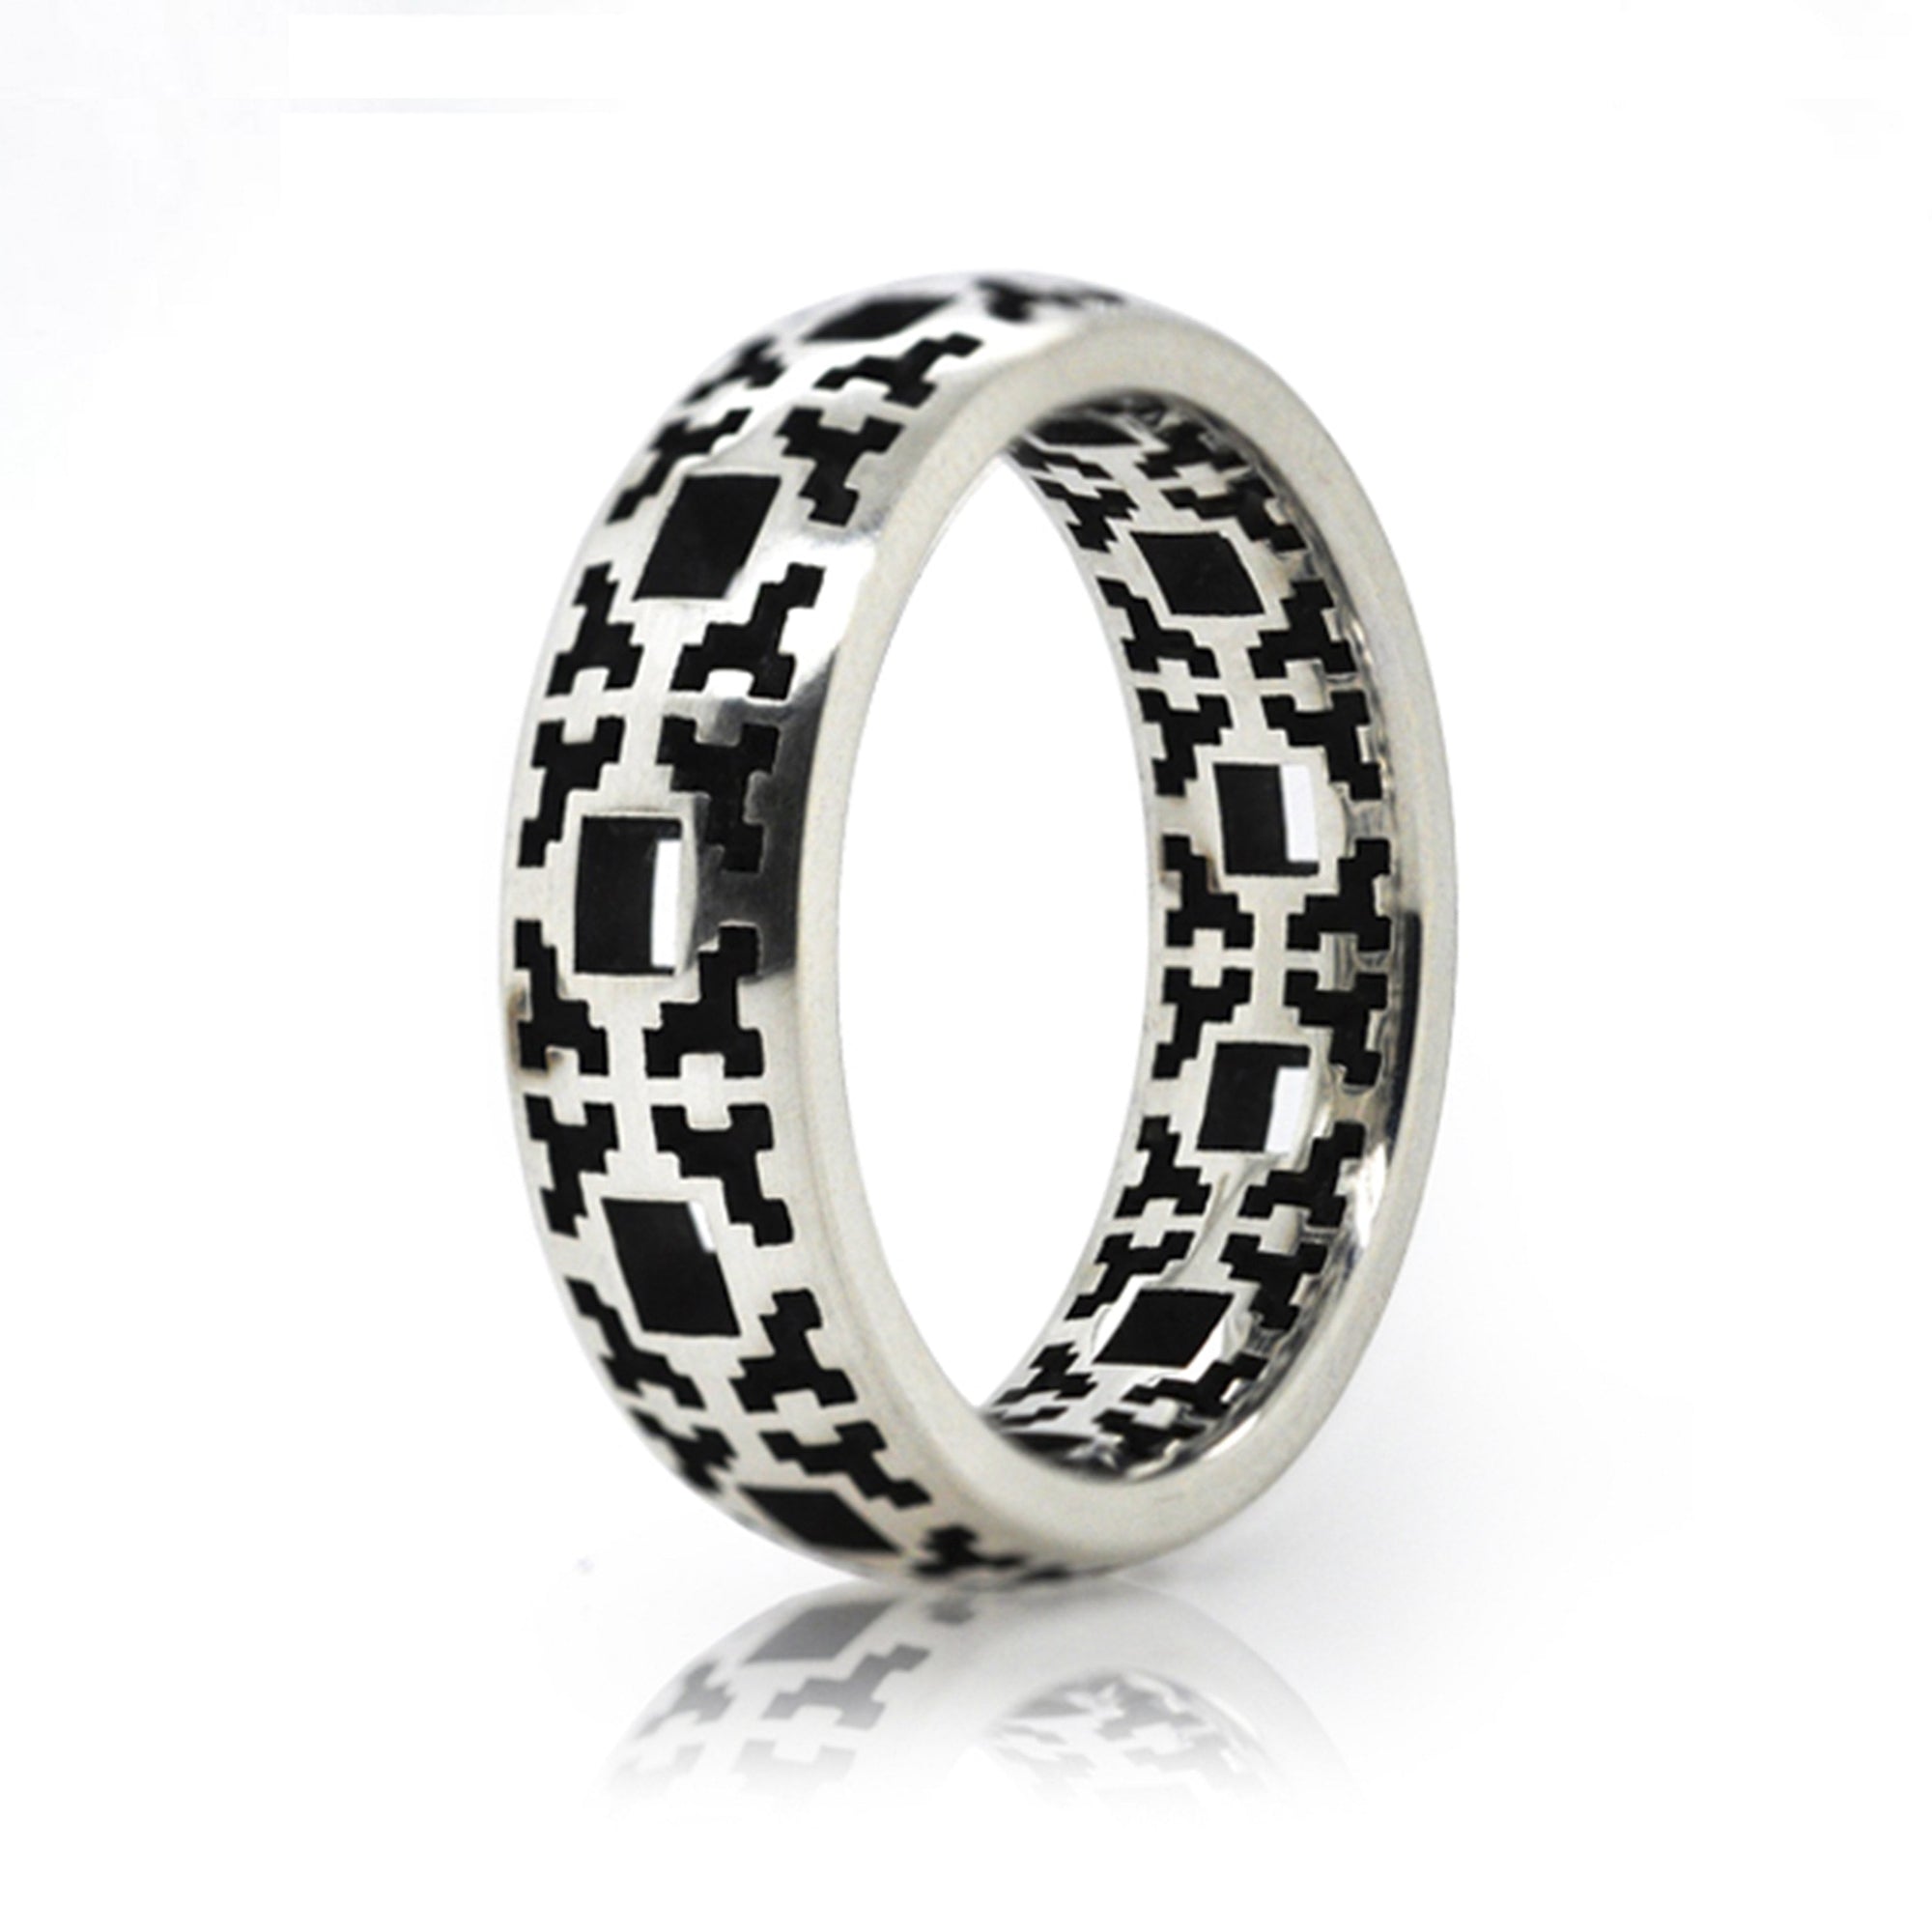 Sterling Silver ring featuring patterns of small squares. 